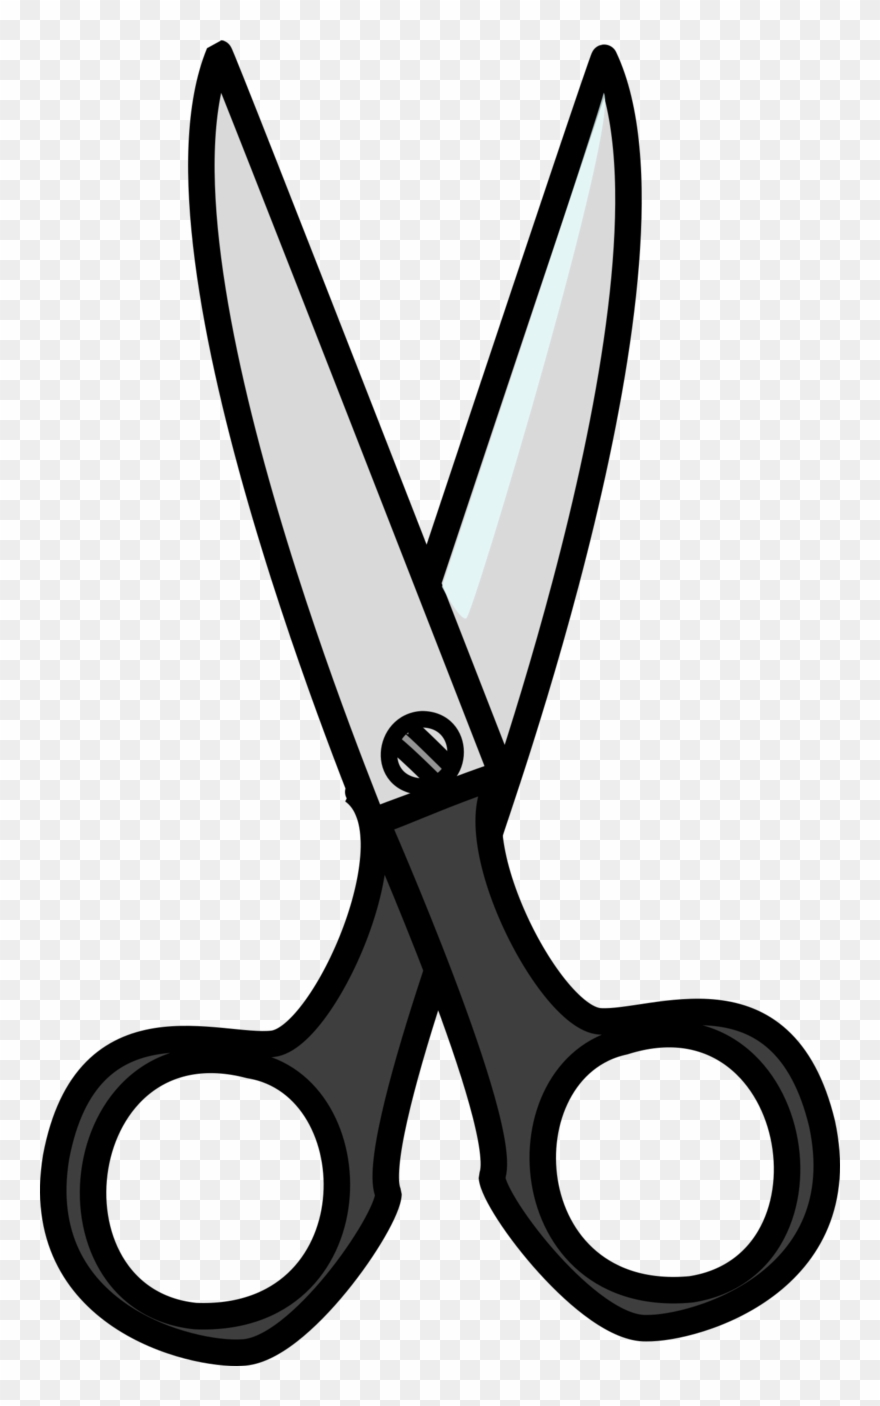 Clipart scissors wide open. Cutting isolated cartoon png